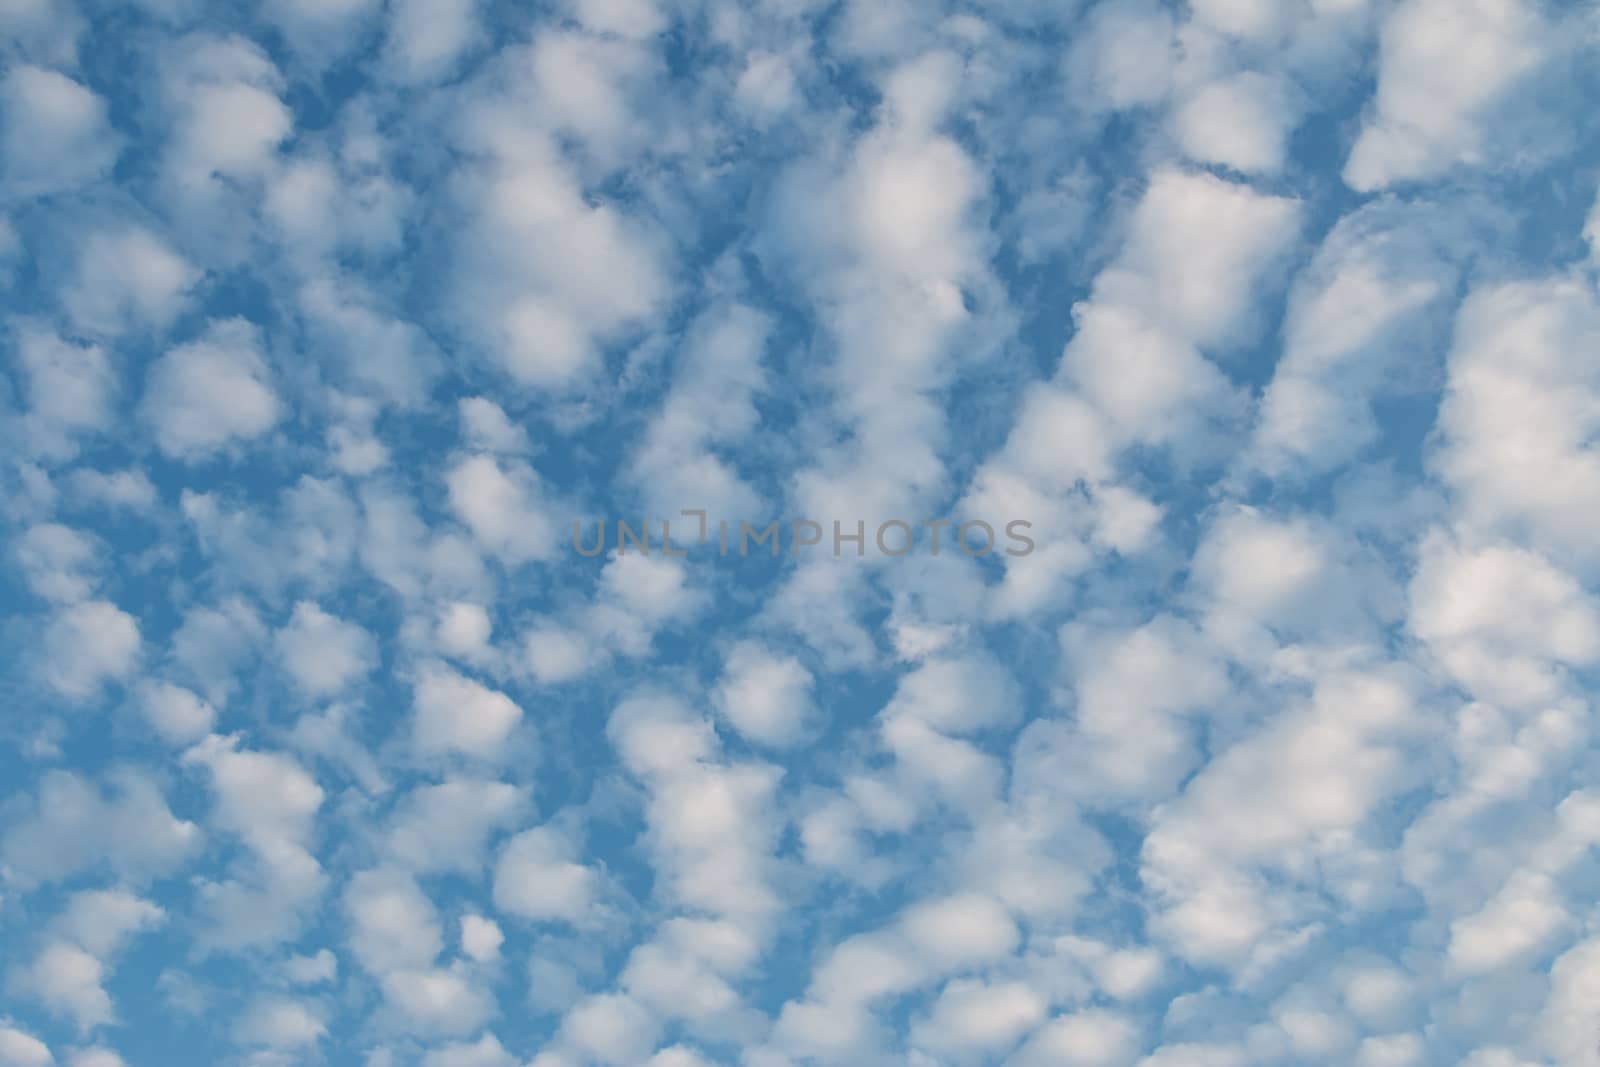 Altocumulus Clouds forming pattern against blue sky